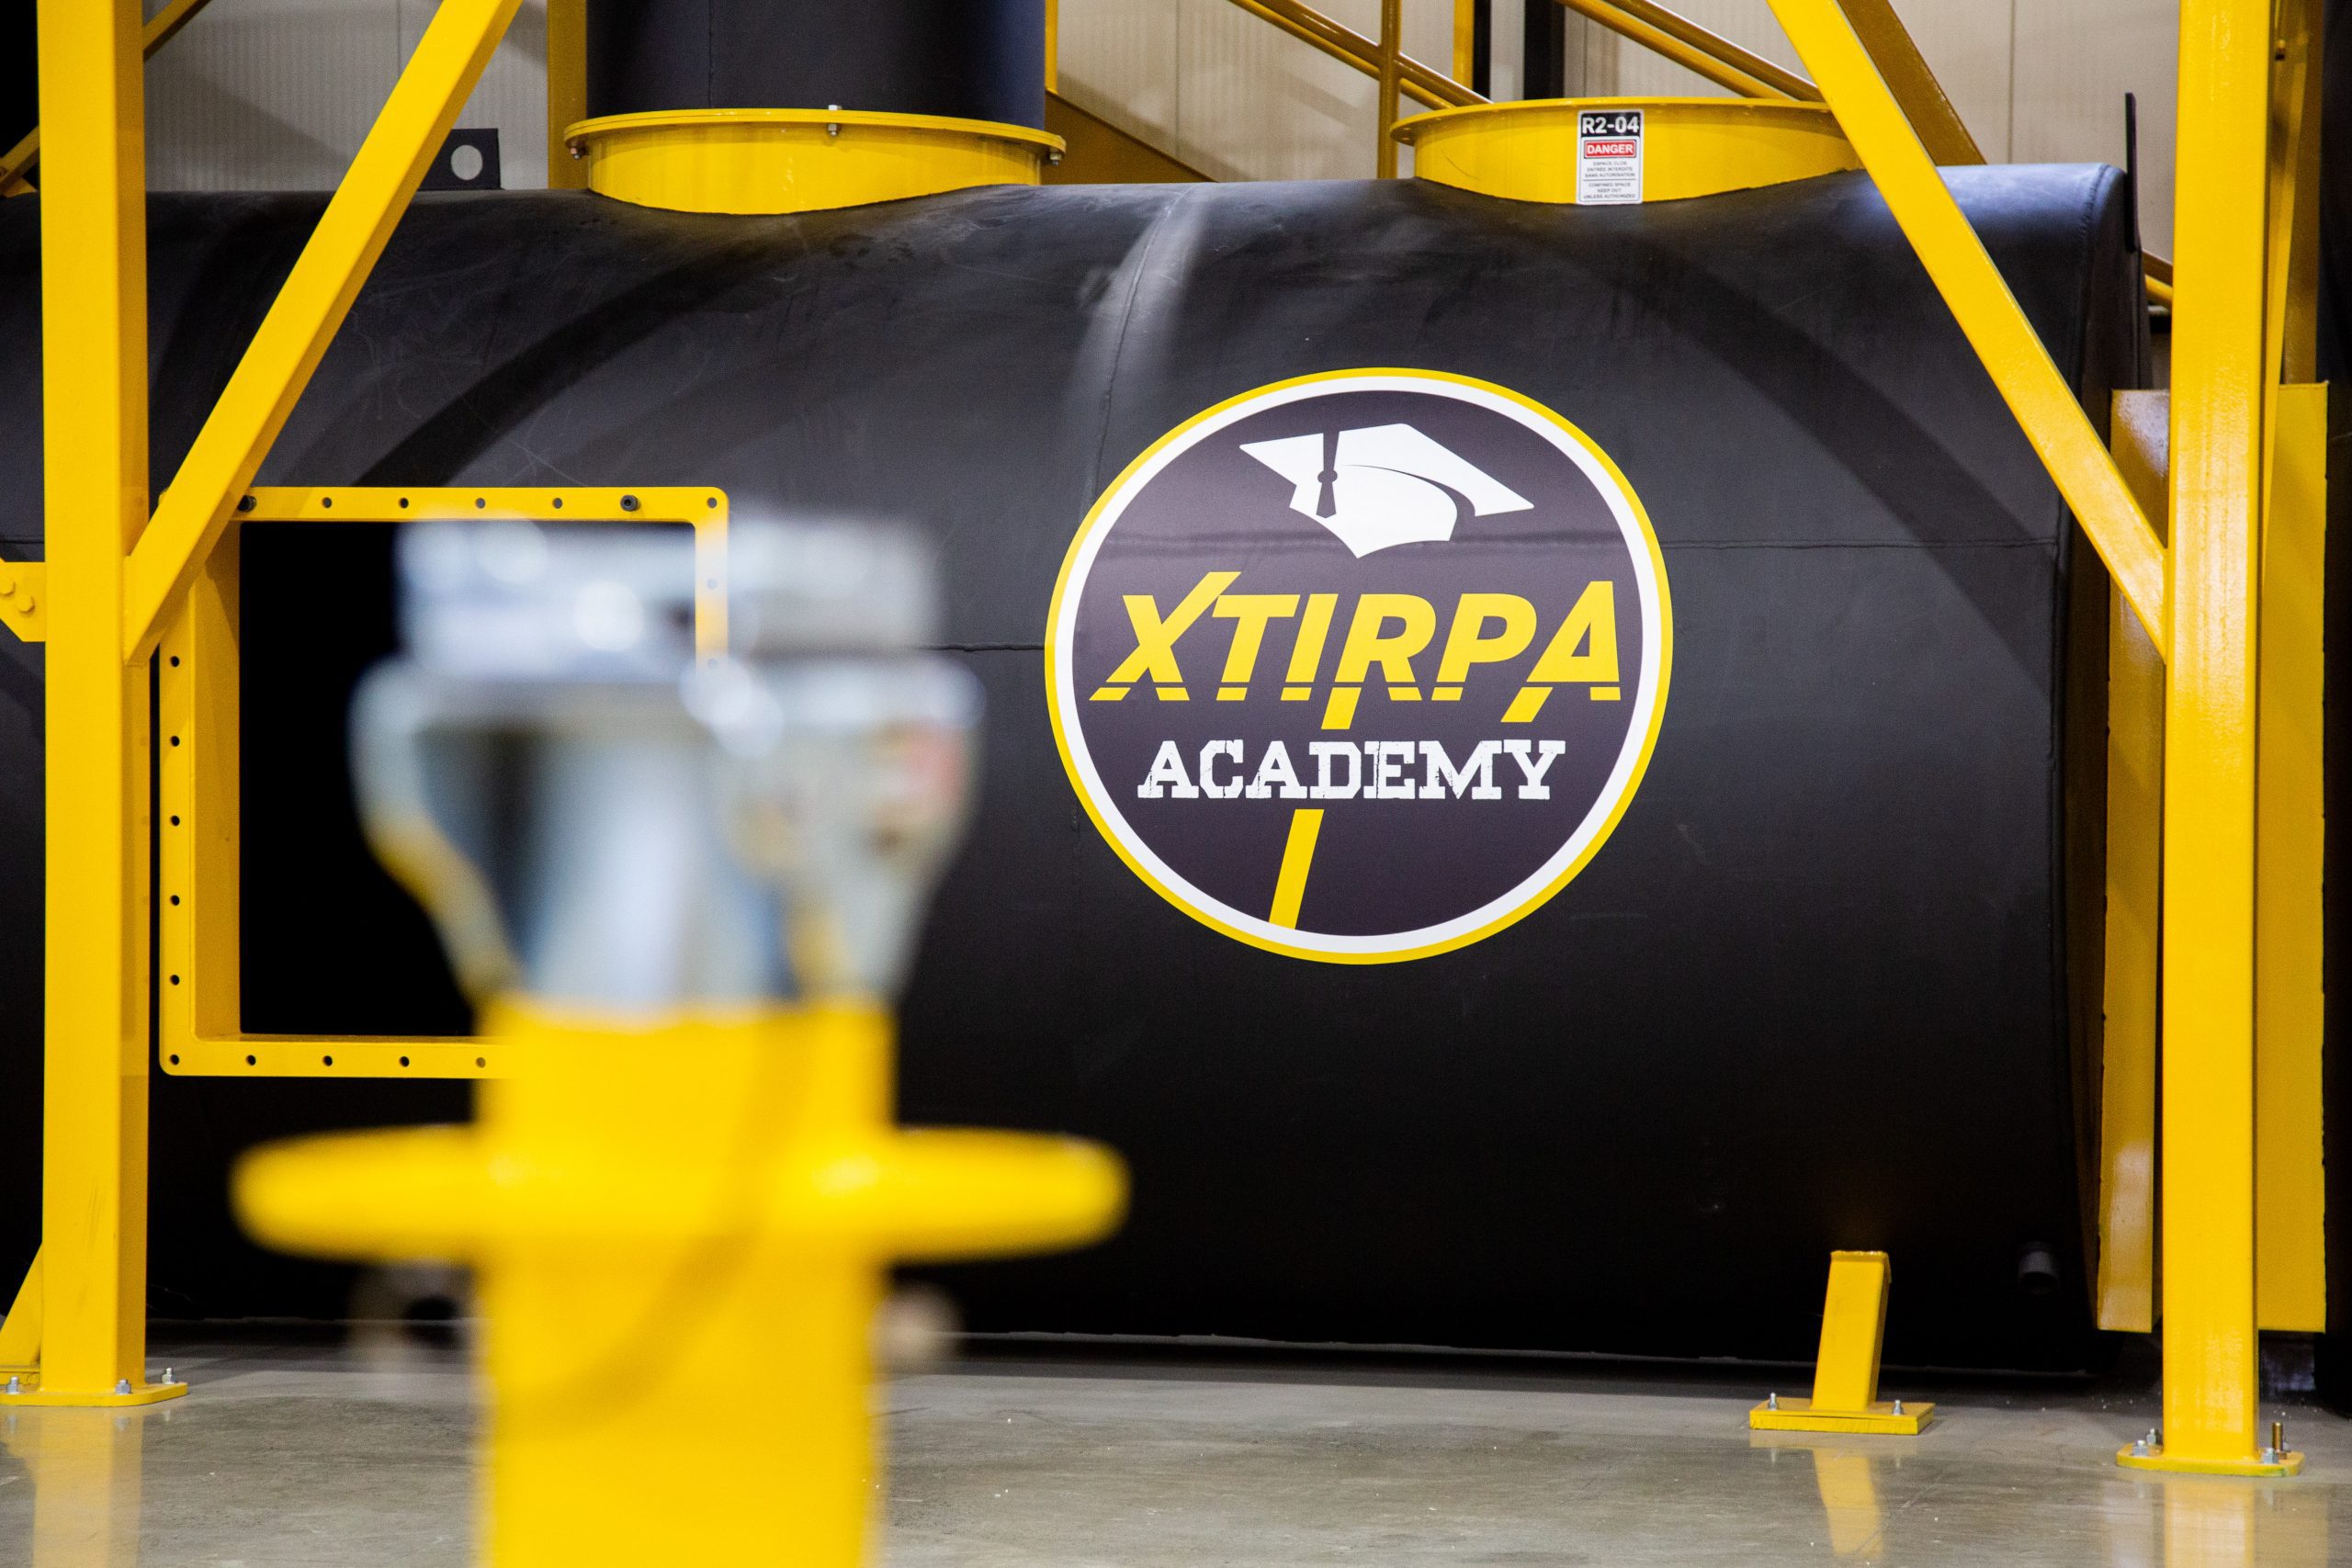 xtirpa-academy-confined-space-access-rescue--8426